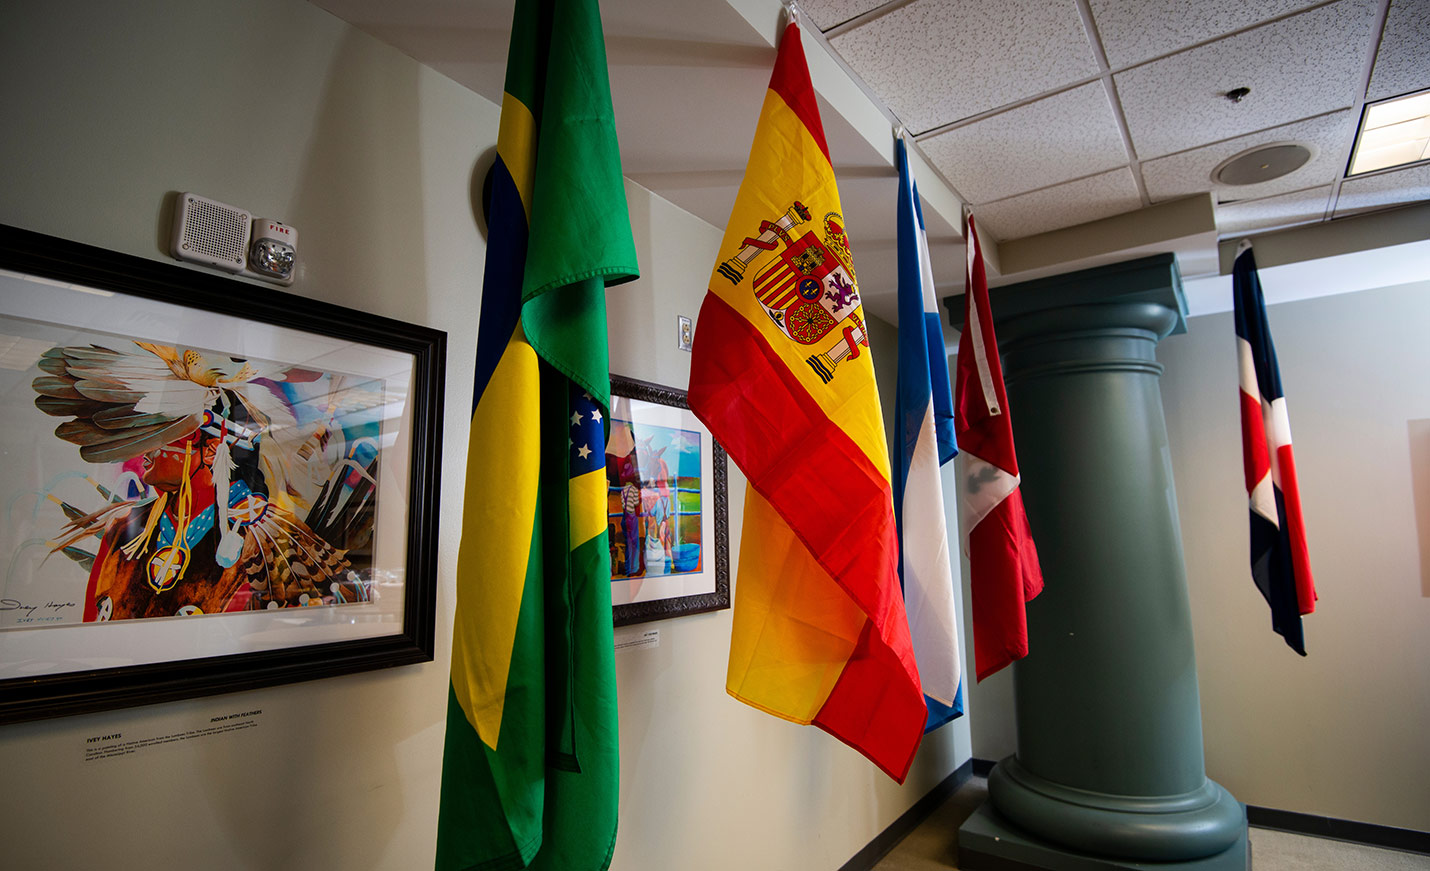 A display of several world flags